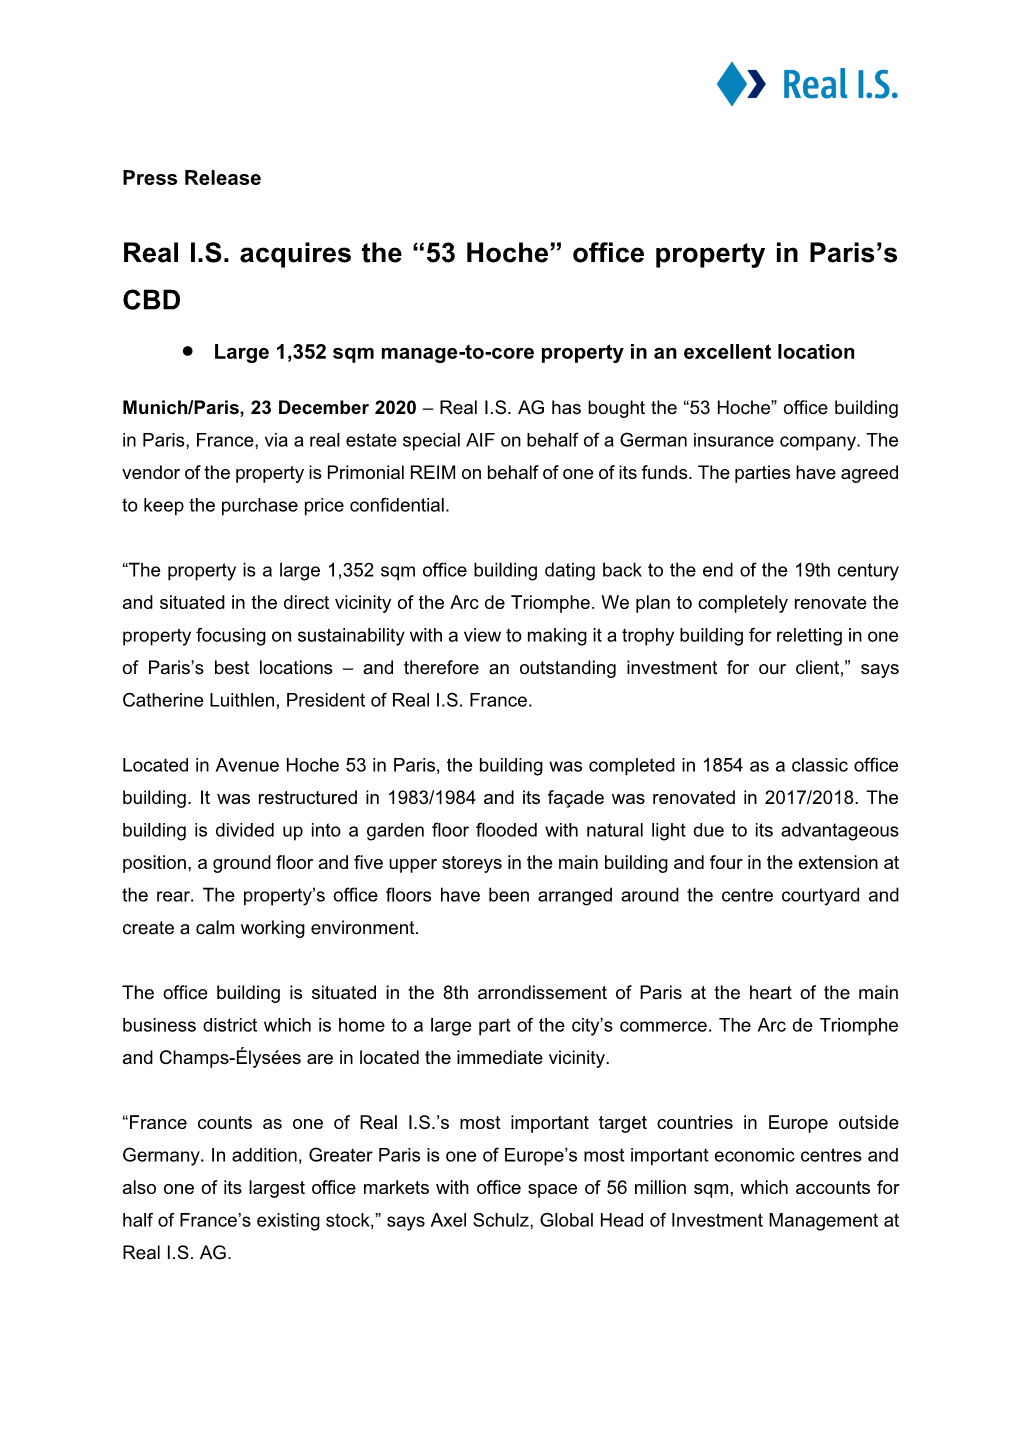 Real I.S. Acquires the “53 Hoche” Office Property in Paris's